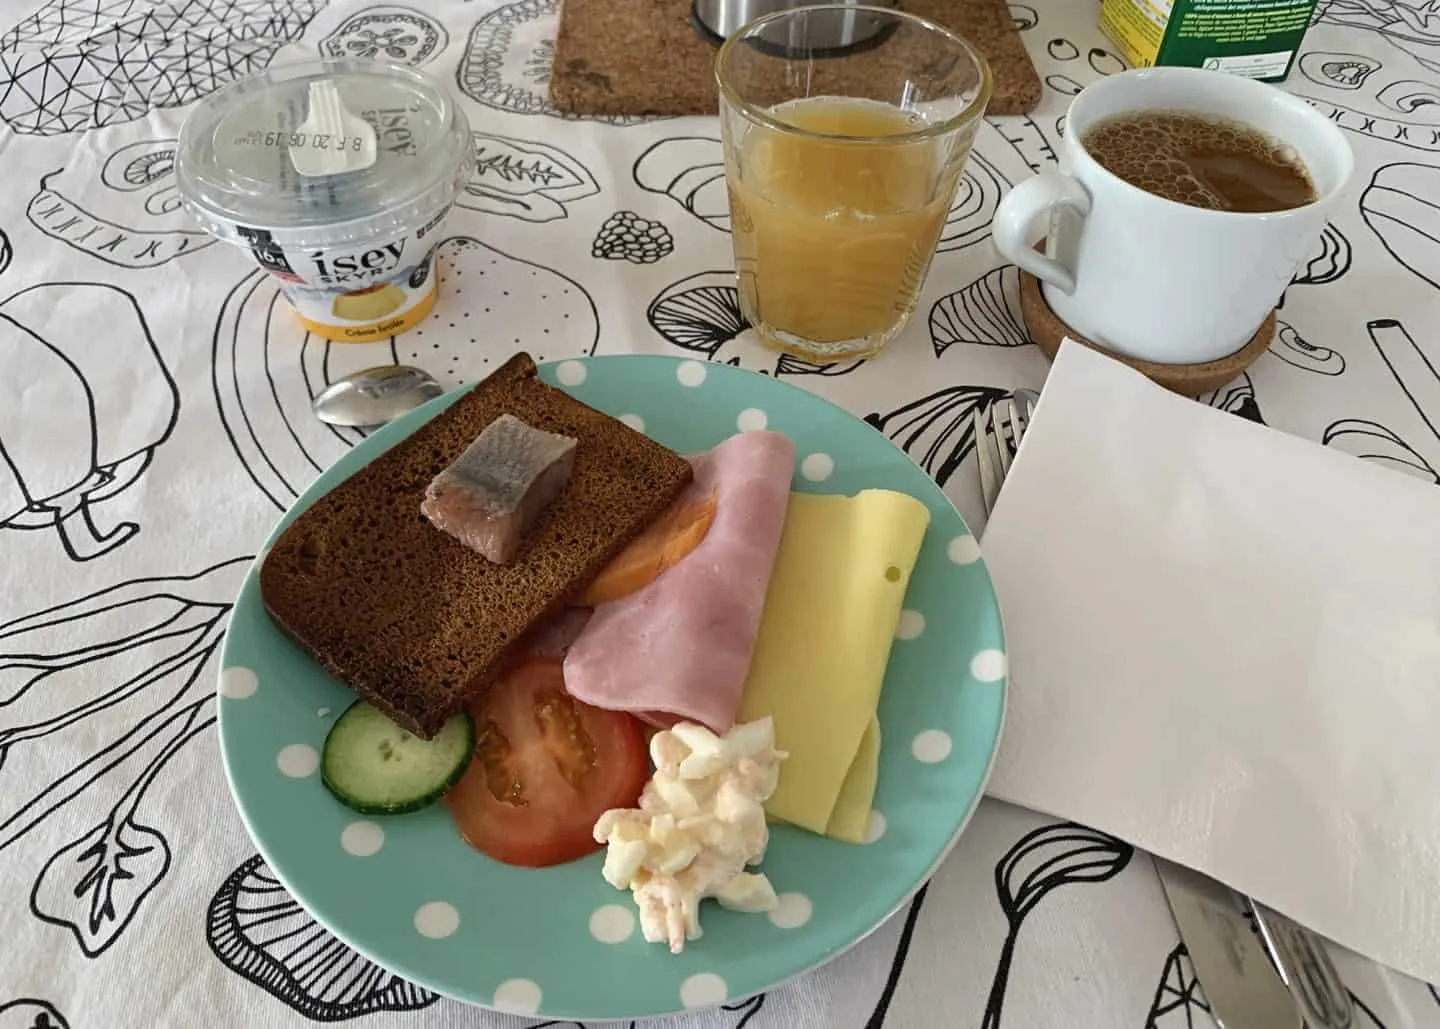 Our Airbnb host at the Laugabol Horse Farm in the Westfjords had a homemade breakfast spread set up for guests every morning